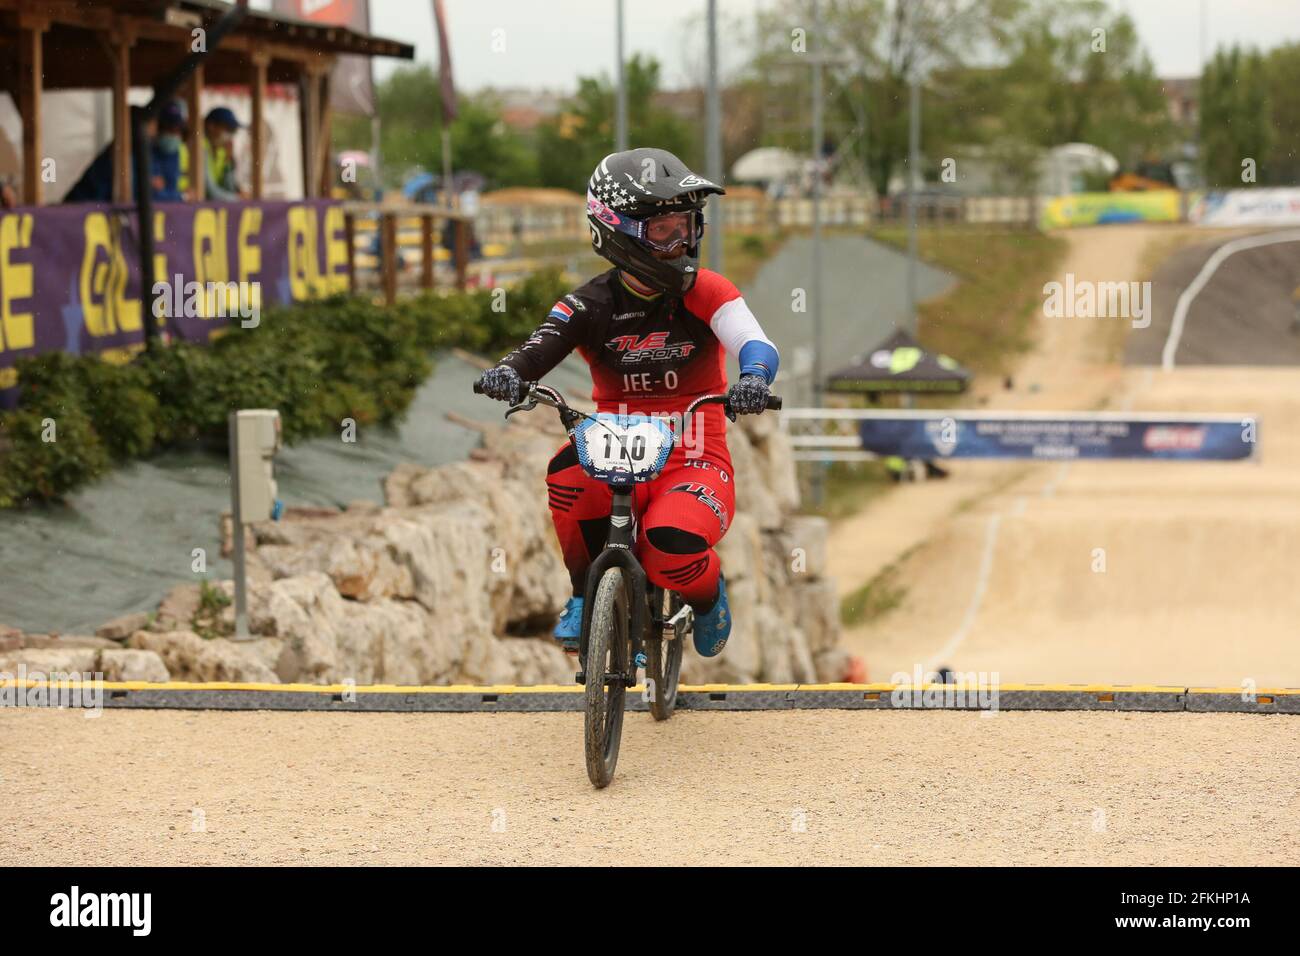 Verona, Italy. 01st May, 2021. Laura SMULDERS of Netherlands (110) competes in the BMX Racing Women Elite Round 1 of the UEC European Cup at the BMX Olympic Arena on May 1st 2021 in Verona, Italy Credit: Mickael Chavet/Alamy Live News Stock Photo